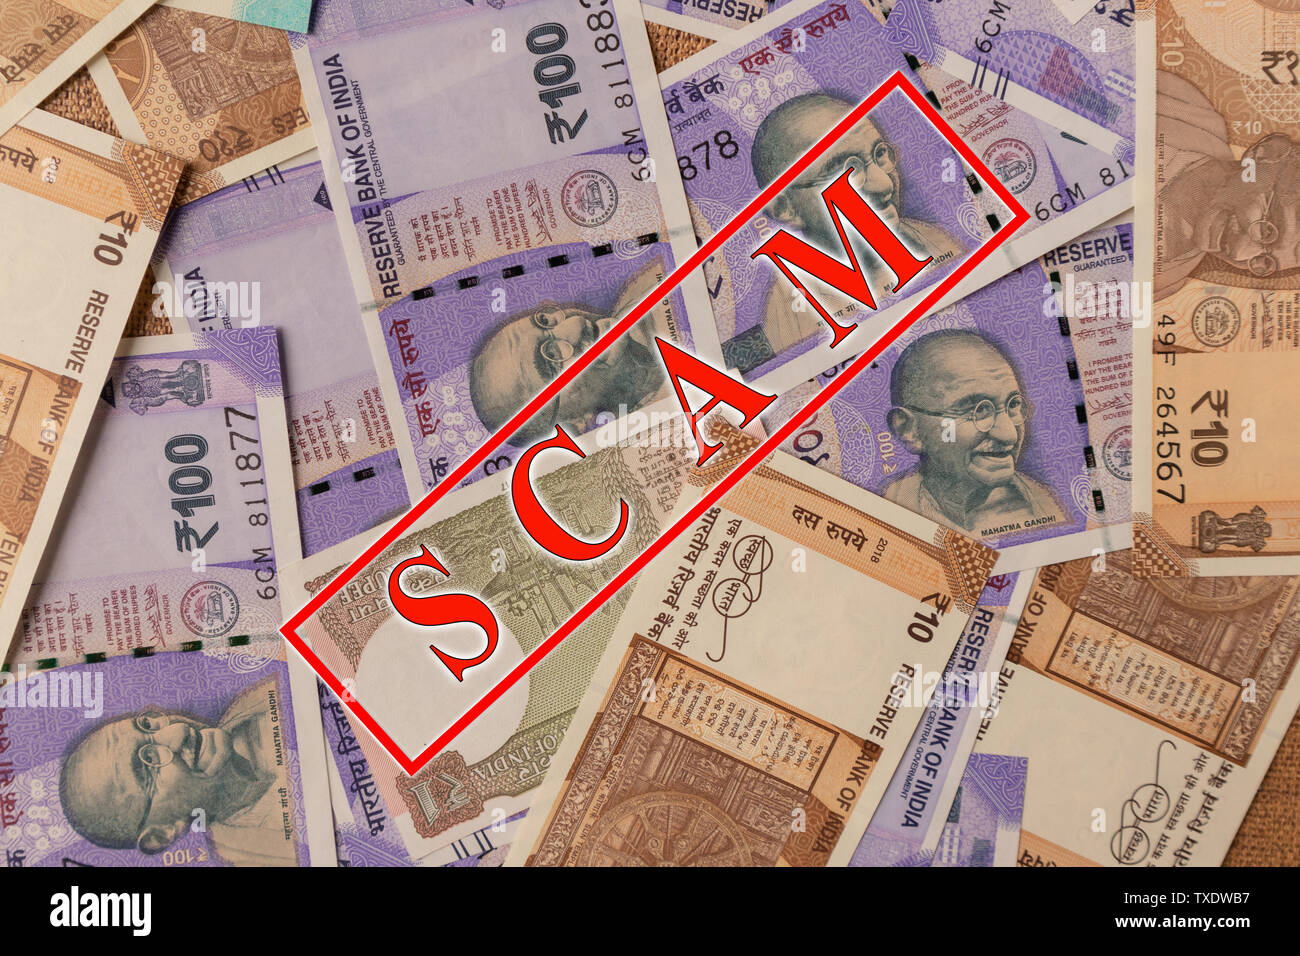 Scam and money concept, Scam in red alphabets printed on Indian currency Notes Stock Photo